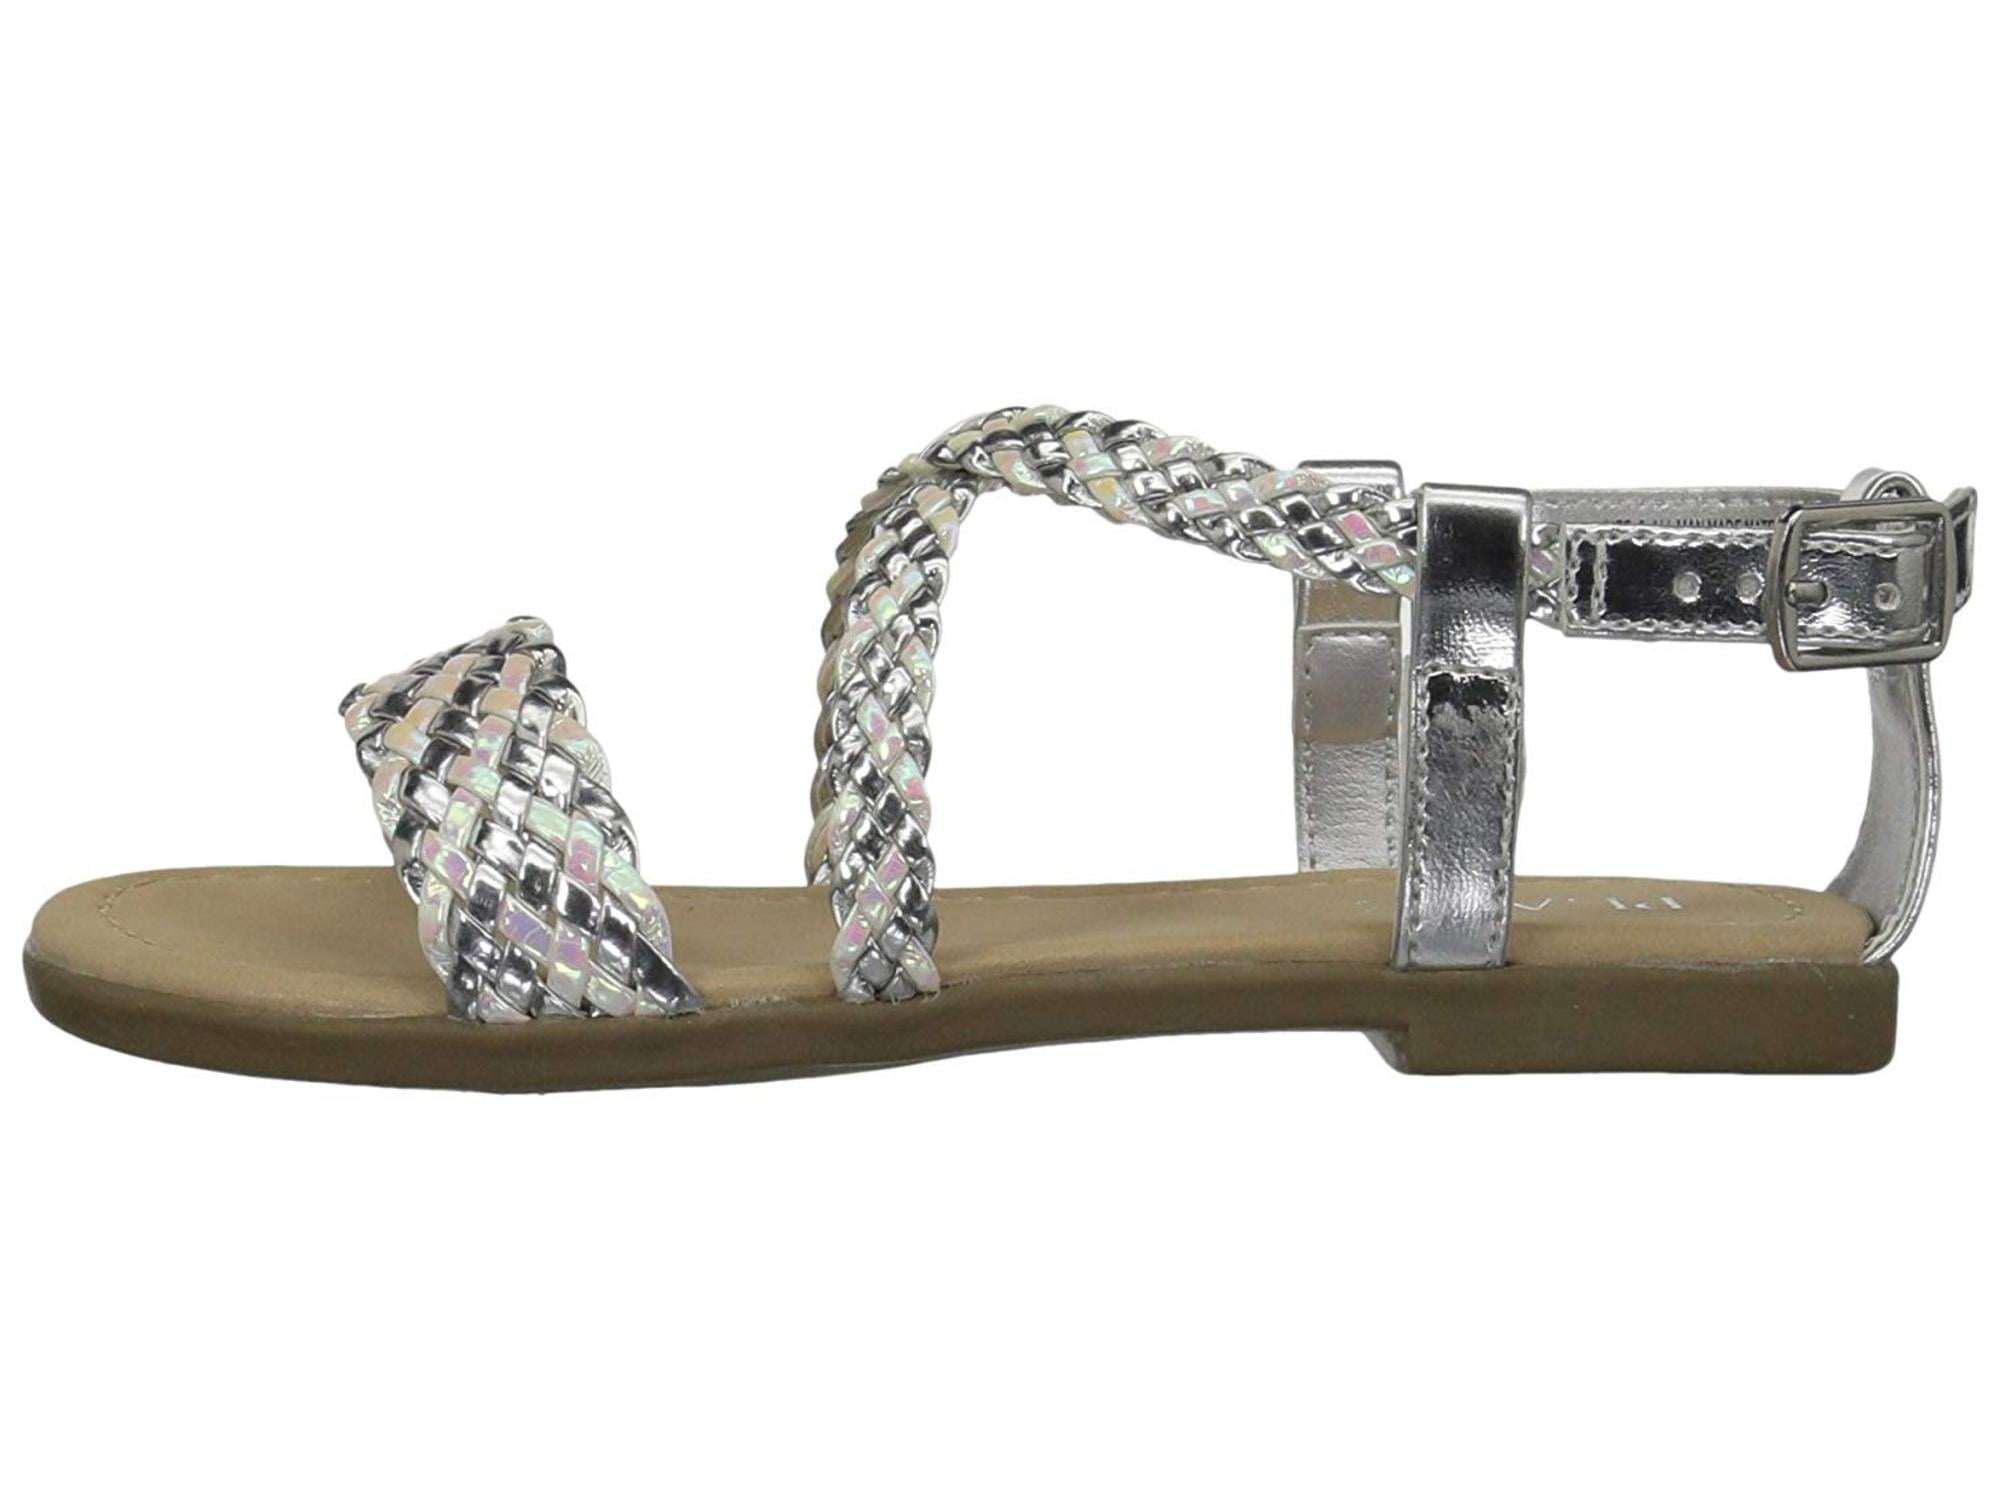 Kids The Children's Place Girls Silver Slipper-1 Buckle Ankle Strap ...